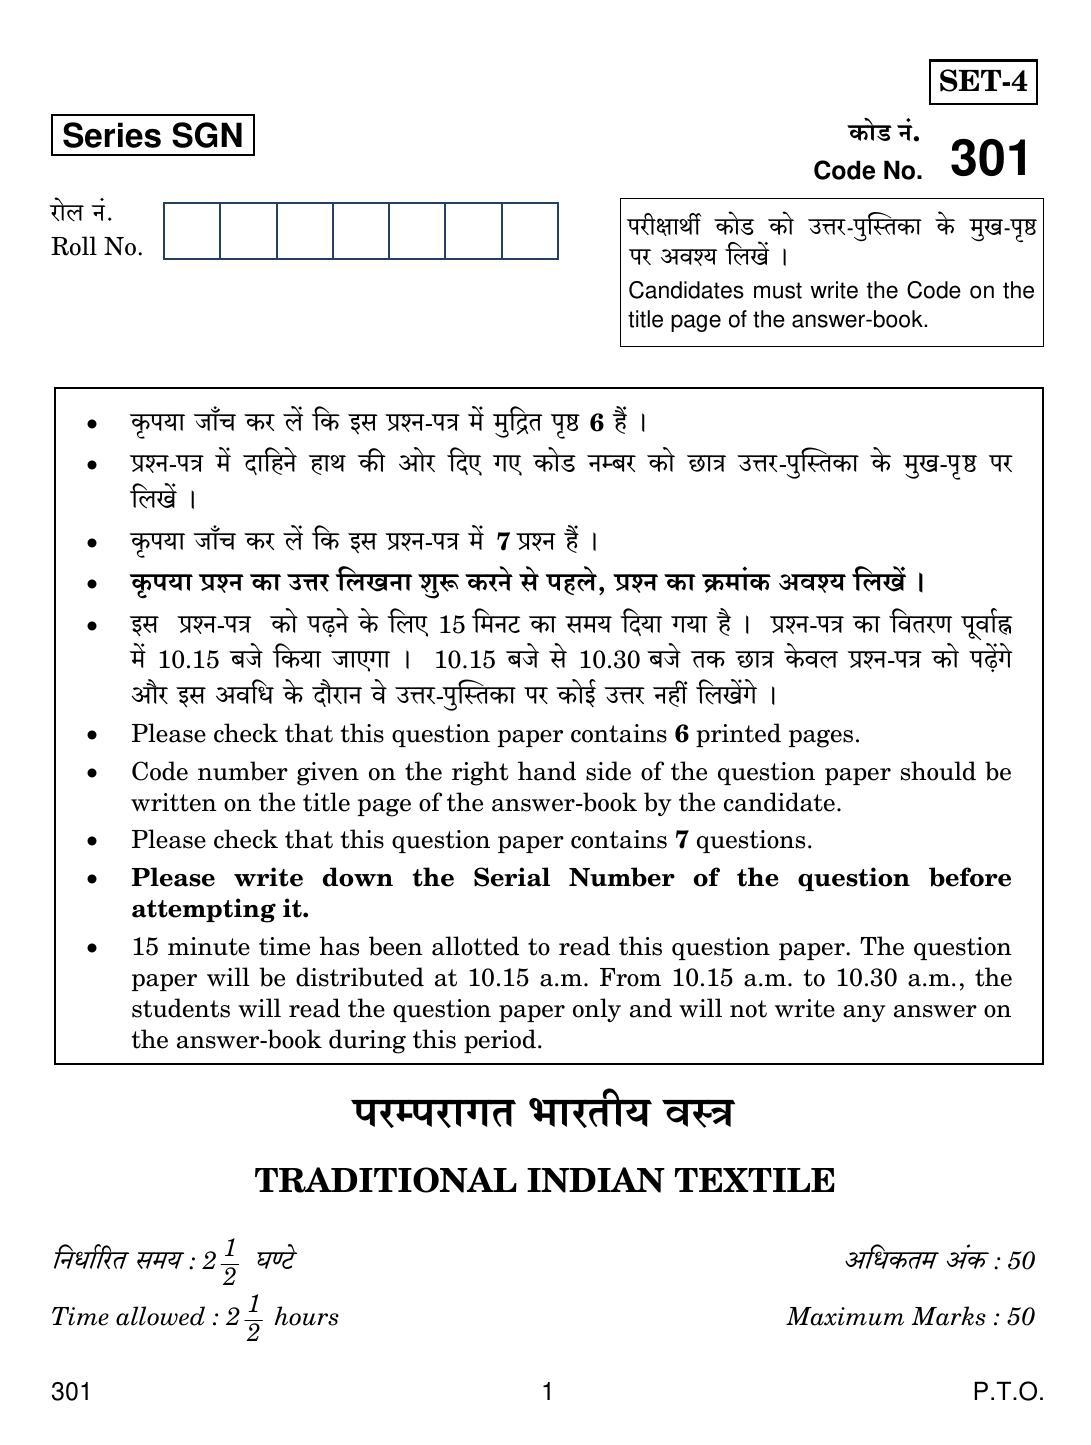 CBSE Class 12 301 TRAD. INDIAN TEXTILE 2018 Question Paper - Page 1